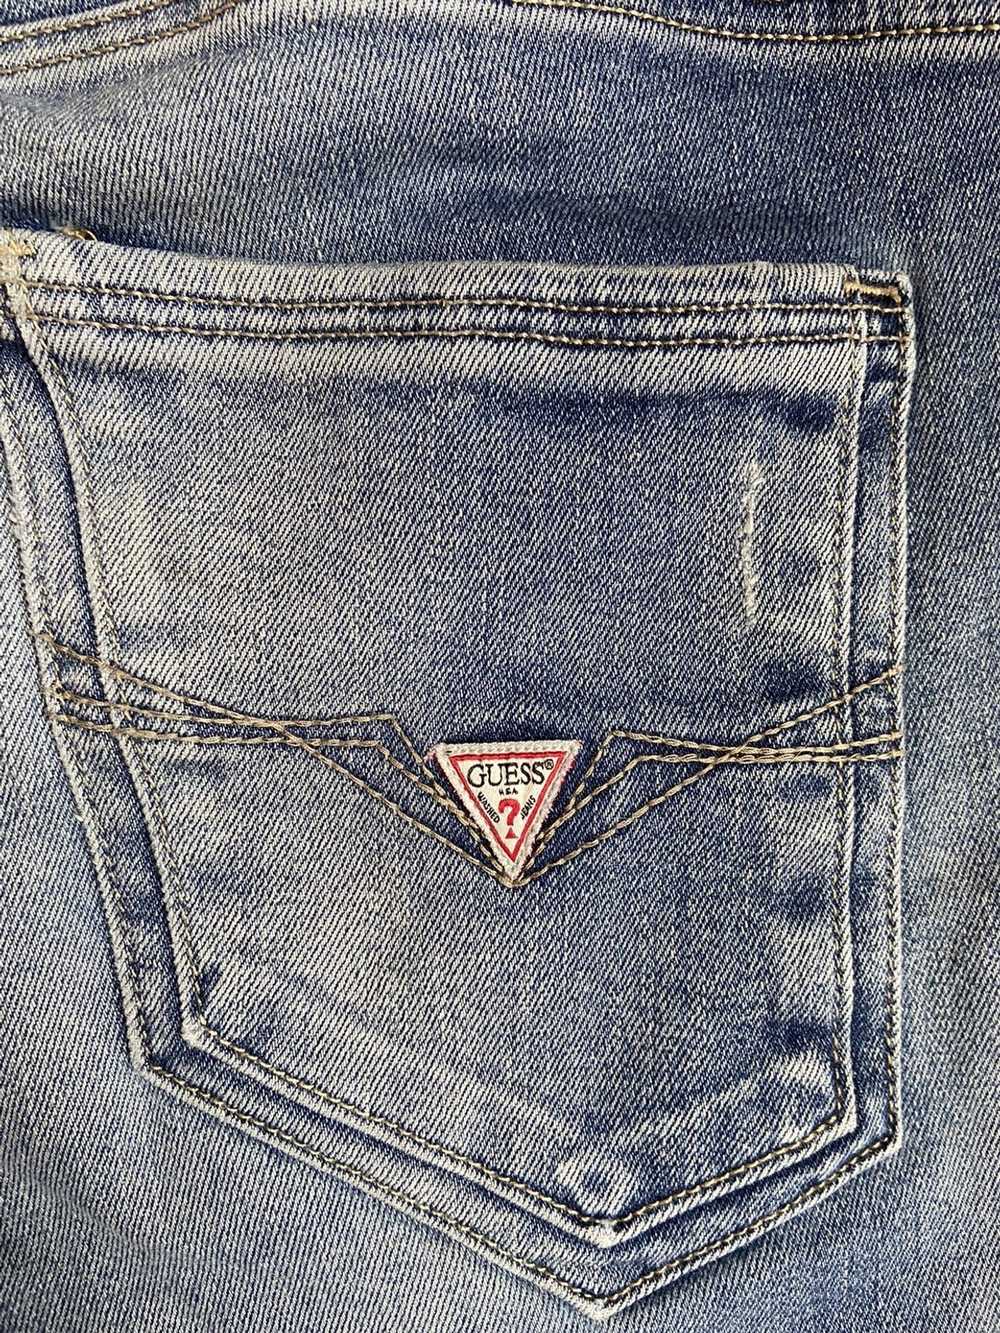 Guess Guess Jeans - image 4